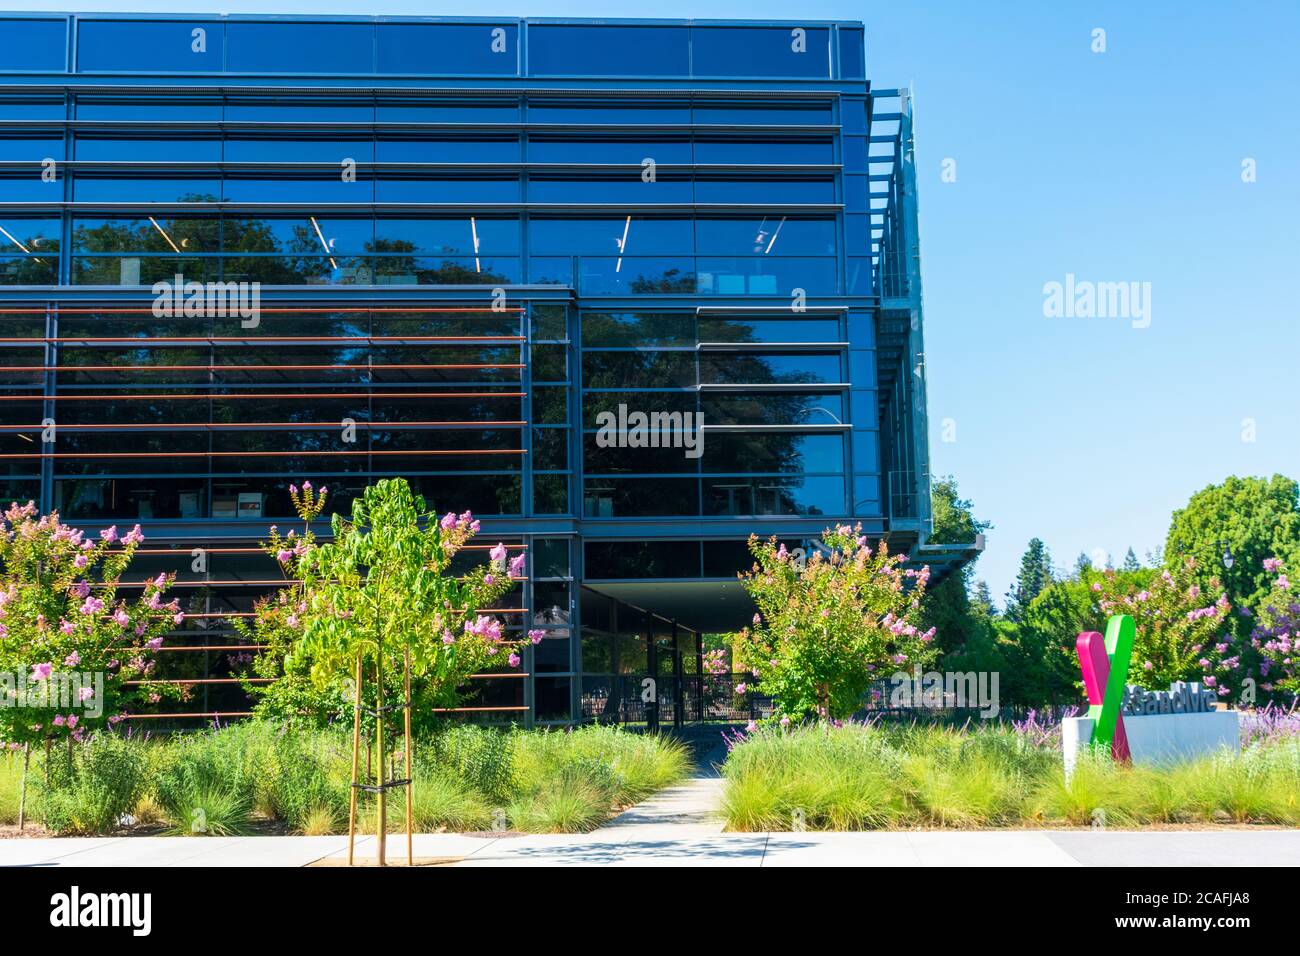 23andMe headquarters campus of a privately held personal genomics and biotechnology company in Silicon Valley - Sunnyvale, California, USA - 2020 Stock Photo